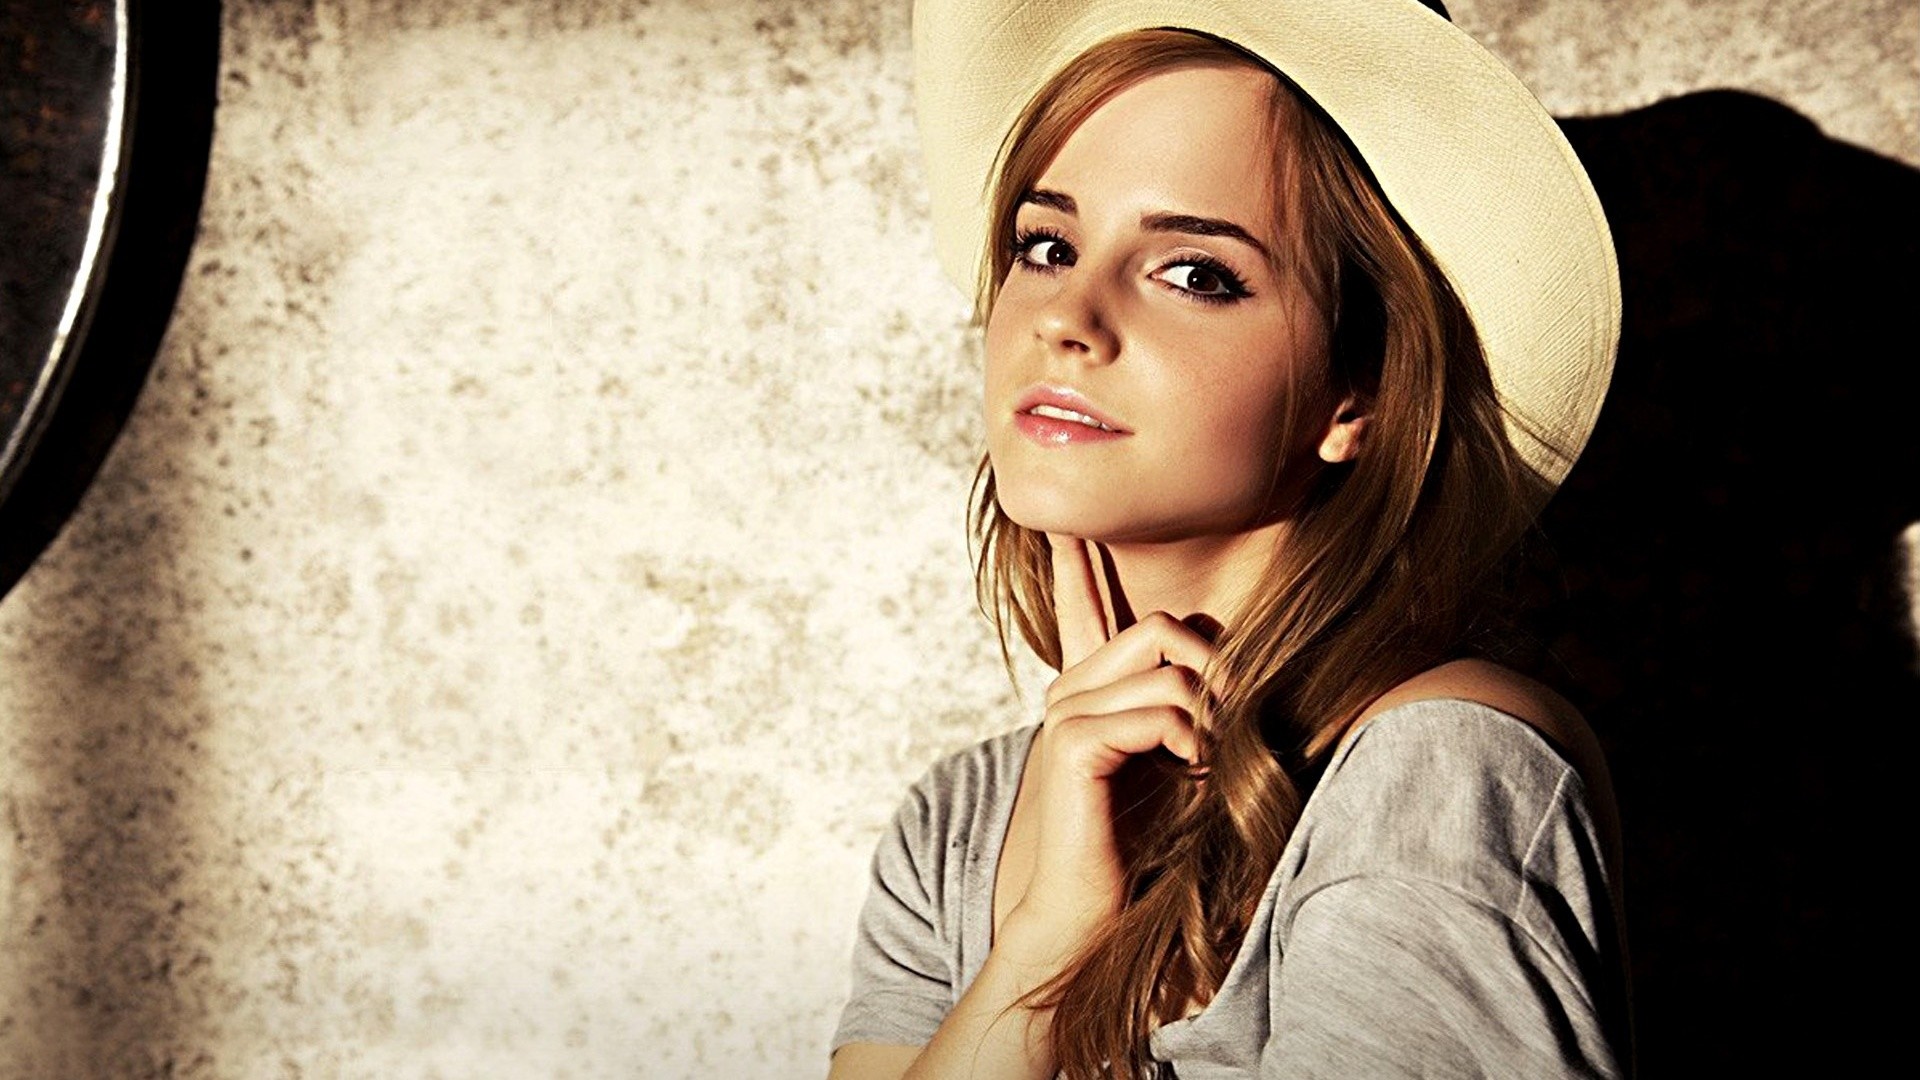 1920x1080 Emma Watson Images wallpapers (87 Wallpapers)